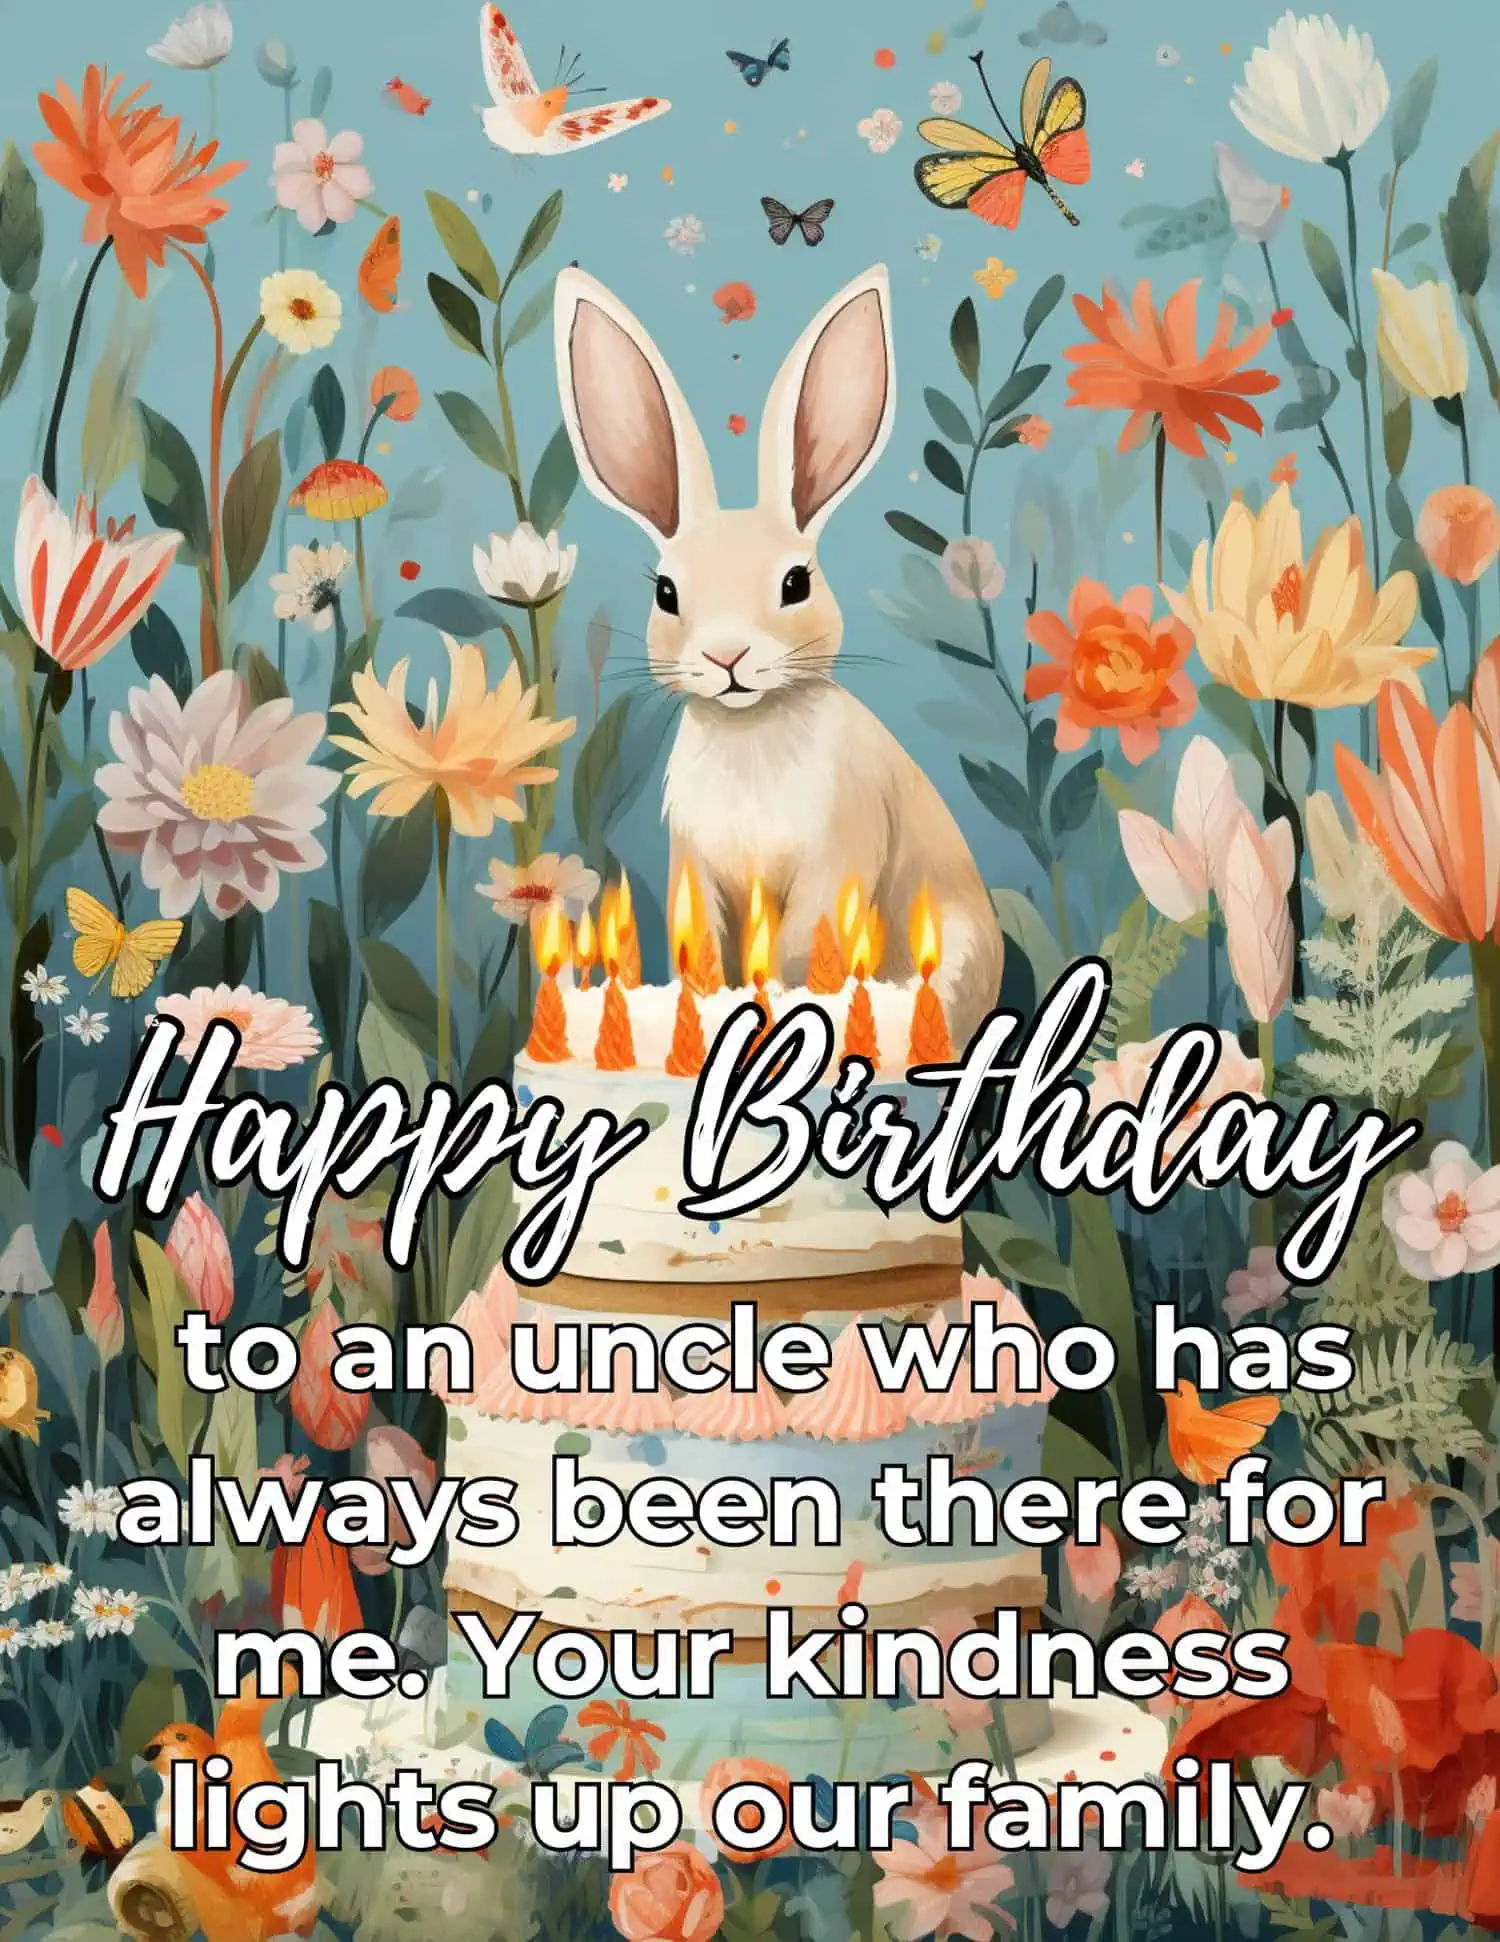 A collection of warm and affectionate birthday wishes for uncles, reflecting the unique bond and heartfelt sentiments shared in the family.